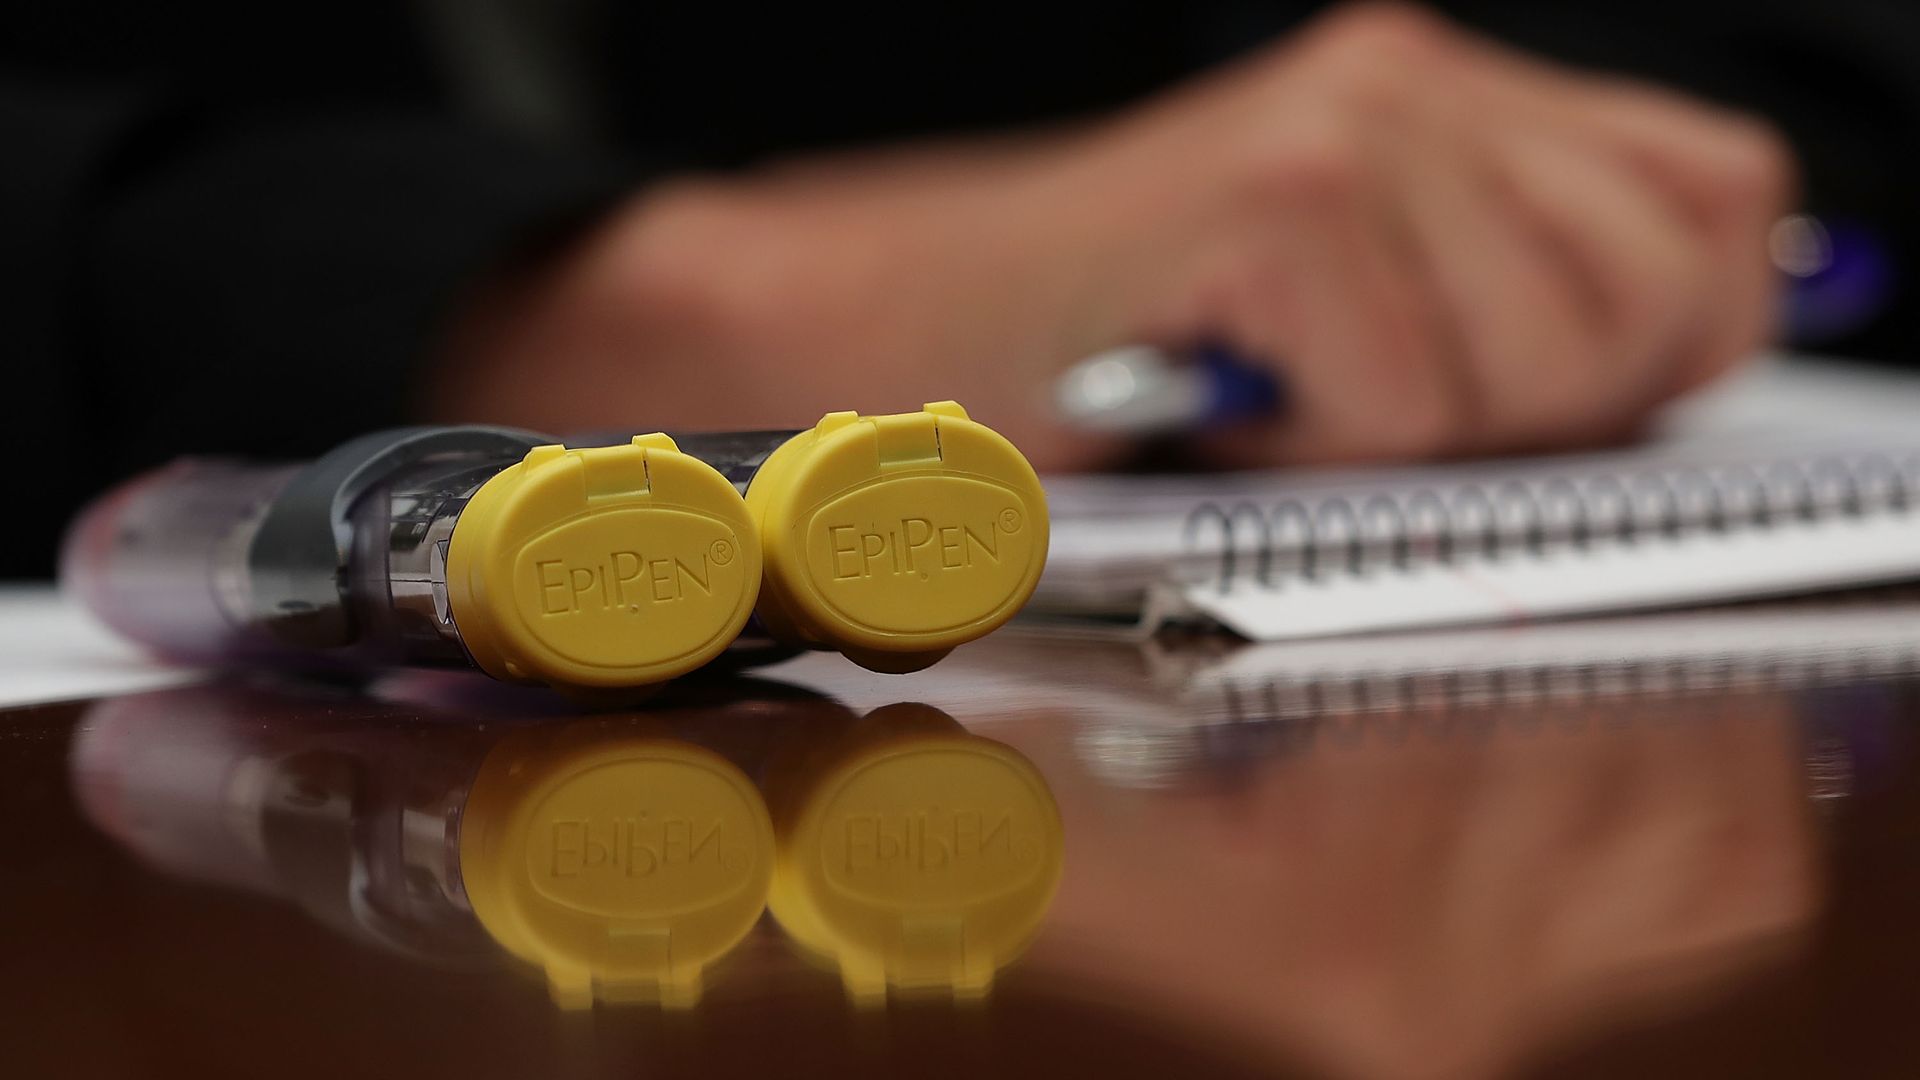 A pair of EpiPen's on a table.